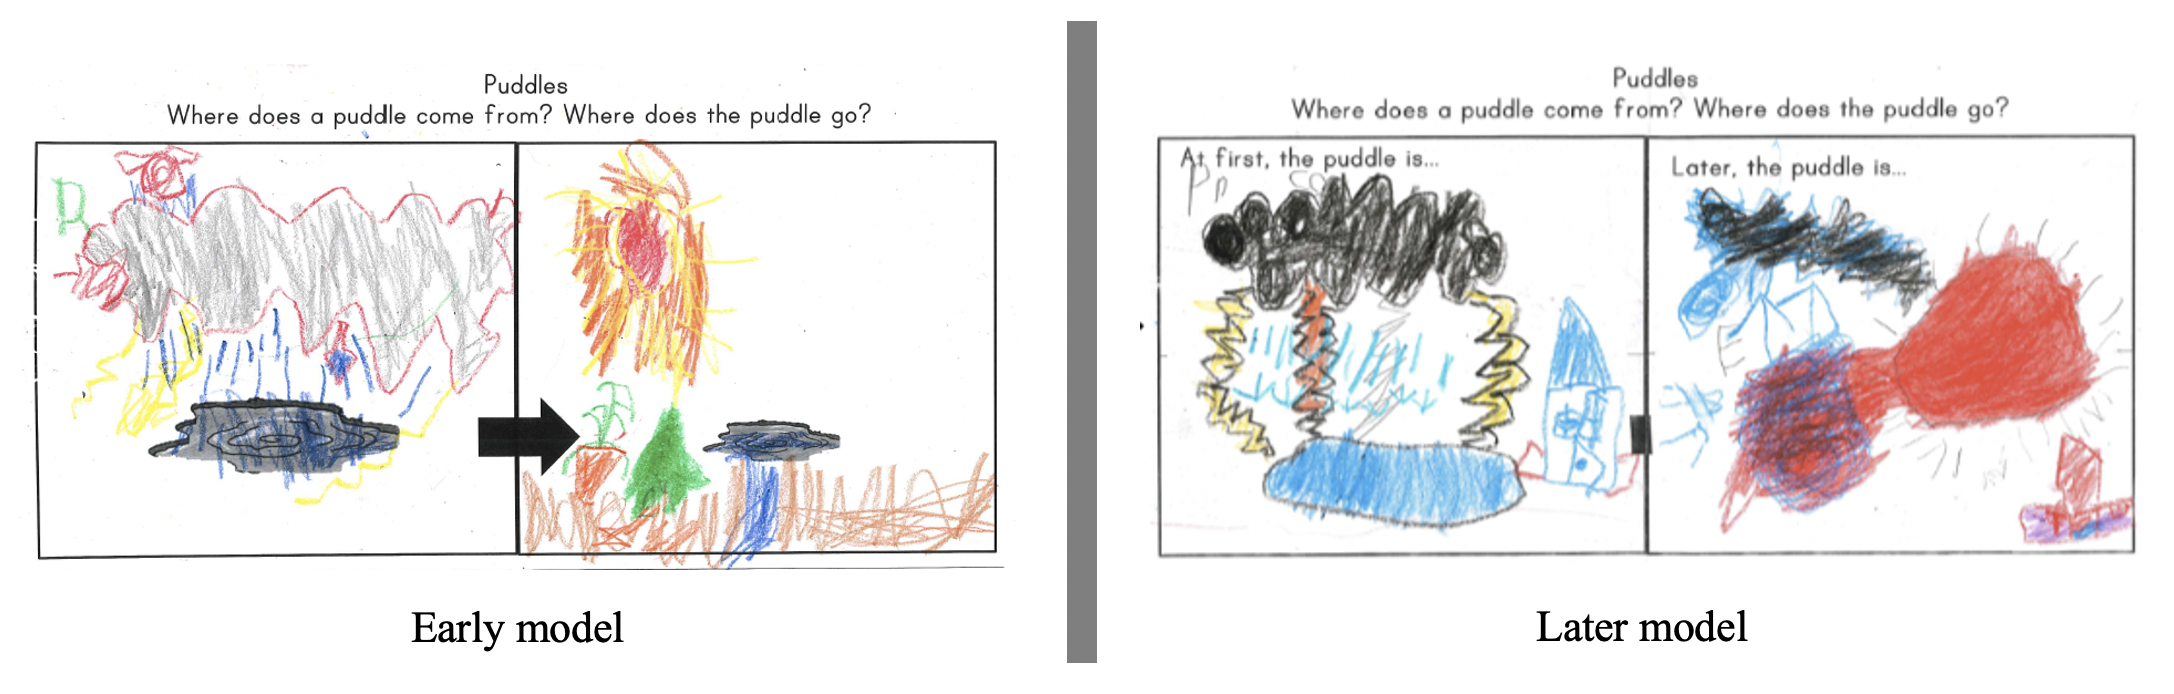 A student's earlier and later model of what happens to puddles. The model asks students Where does a puddle come from? Where does the puddle go? and has two boxes. The earlier model has a raincloud and lightning with rain pouring down into the puddle and the other box with a sun, a carrot, the puddle, and a muddy ground. In the first box of the the later model, text reads "At first the puddle is..." and has a drawing of a raincloud with lighting and rain pouring down into the puddle and a house. The second box of the later model reads "Later, the puddle is..." and shows people, a cloud, the puddle, and the sun. 